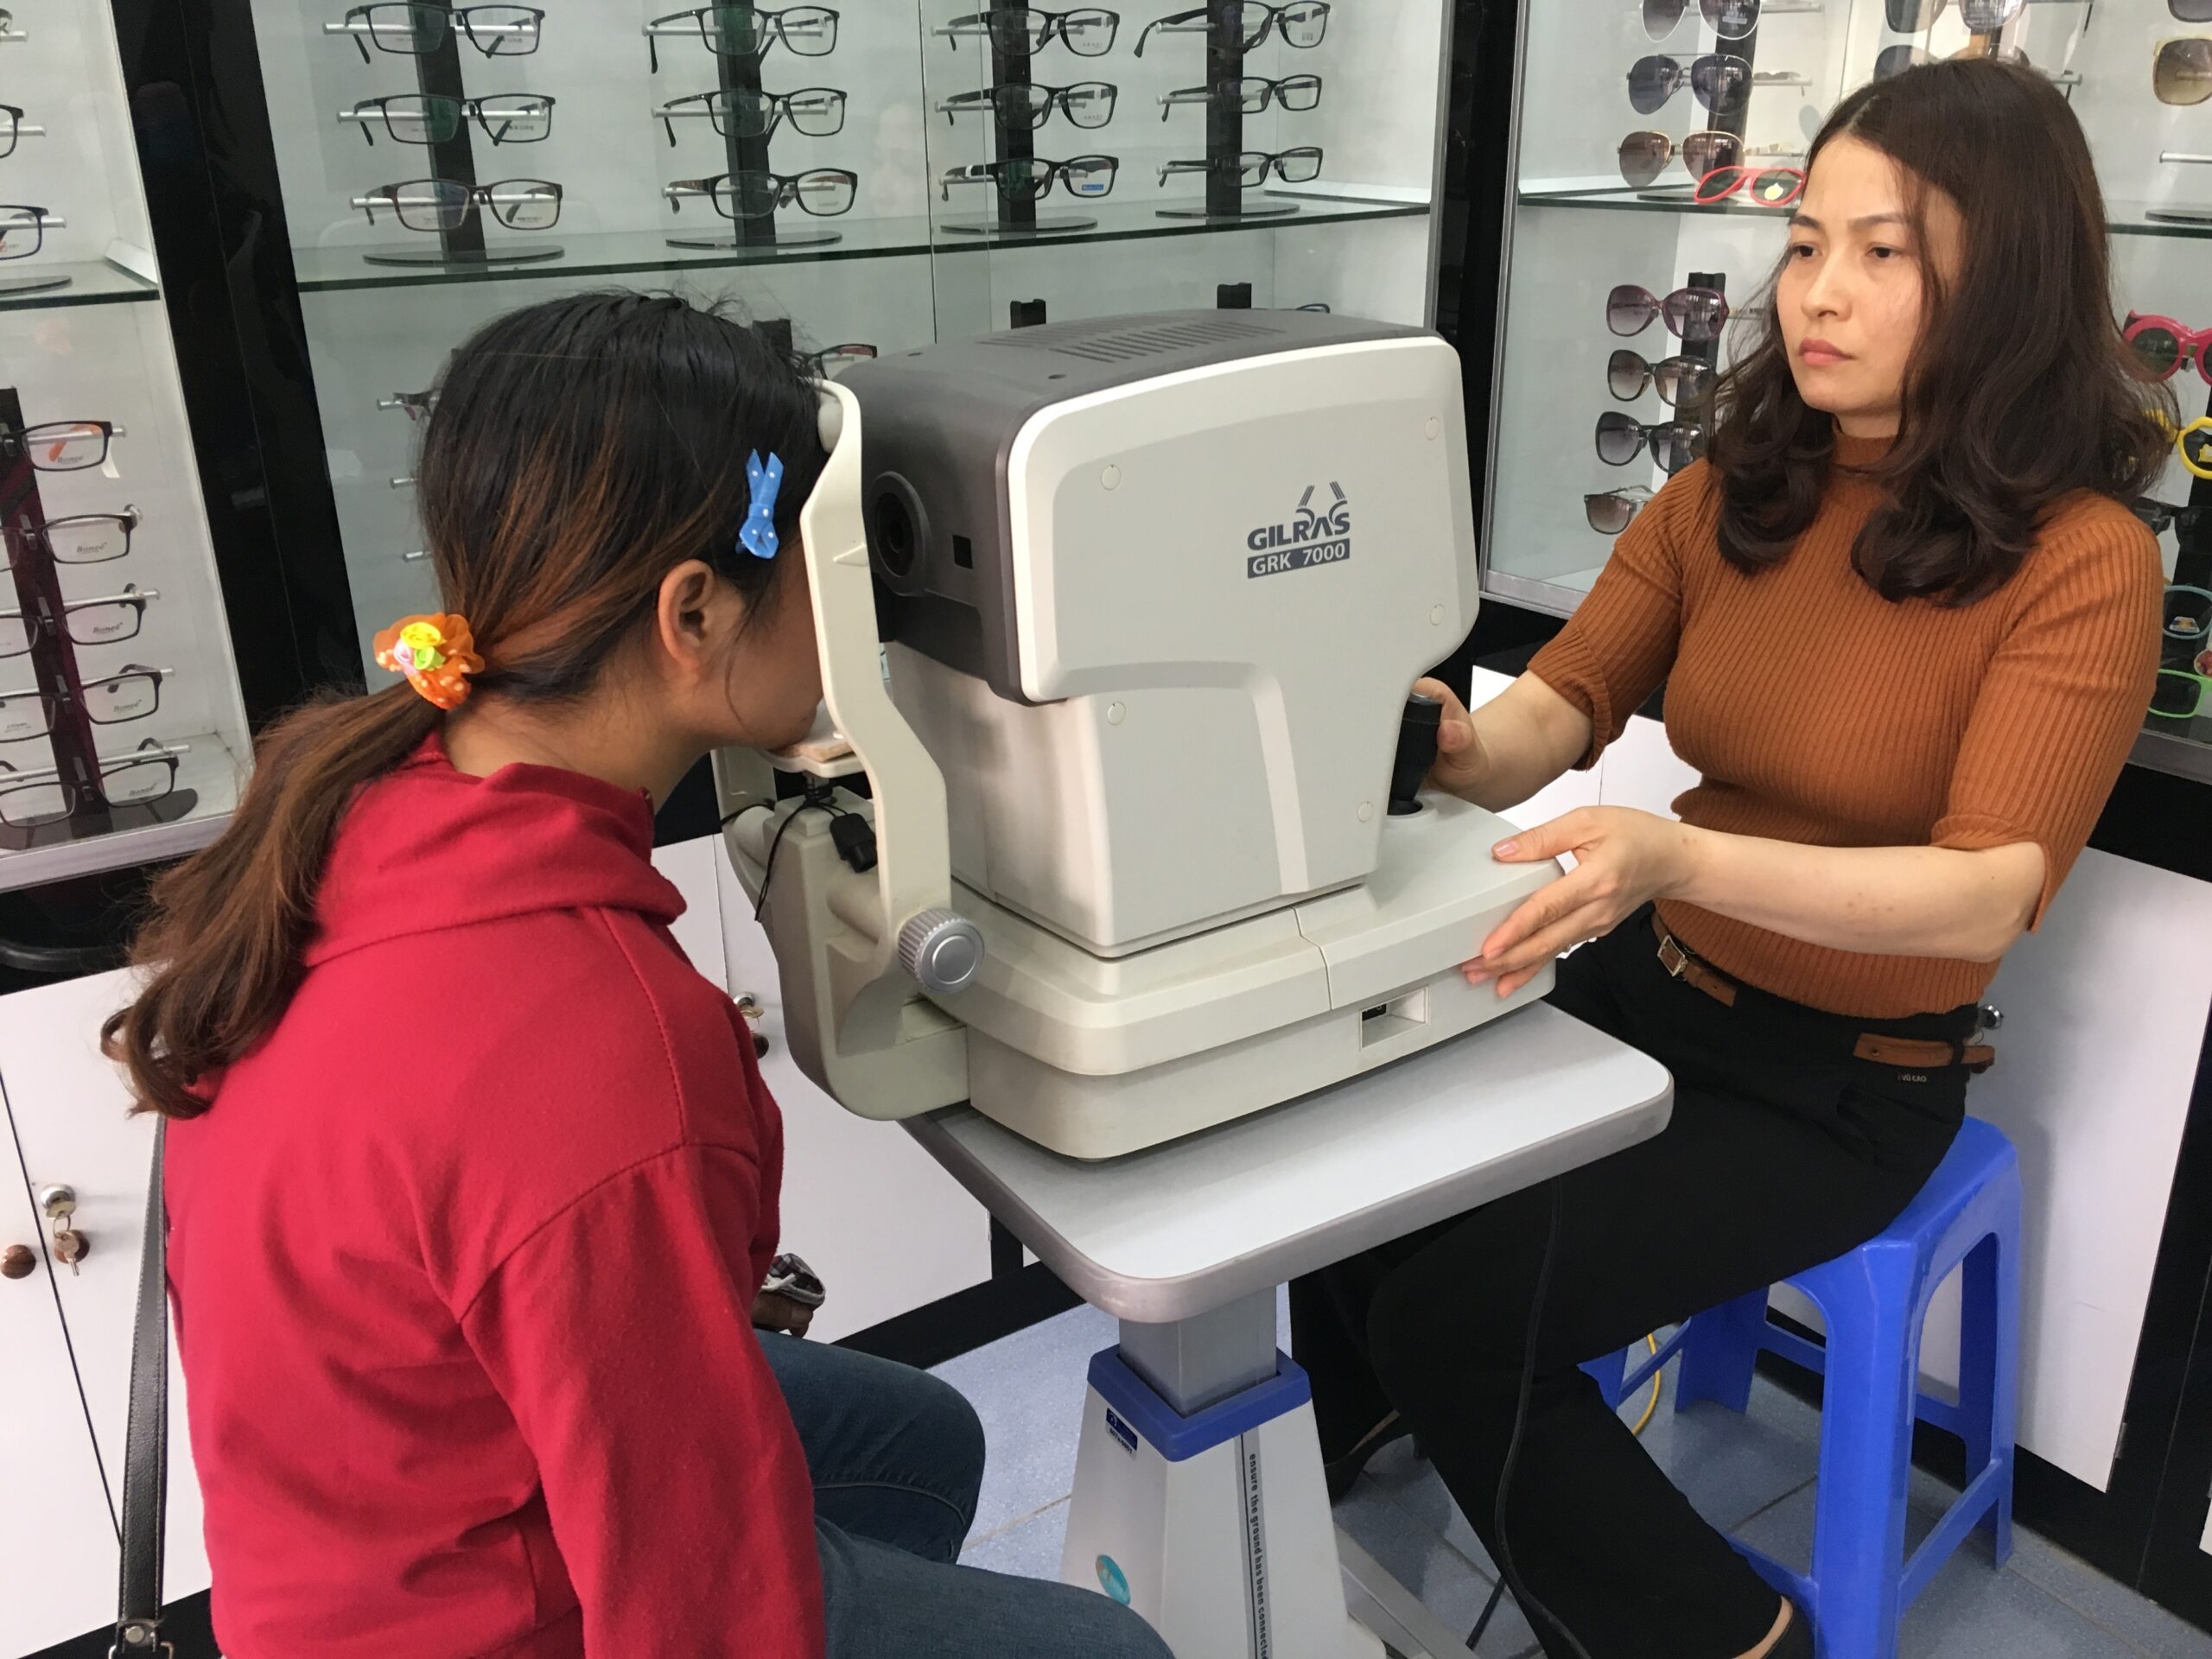 Nguyen Thị Ngoc measuring a client’s eyes